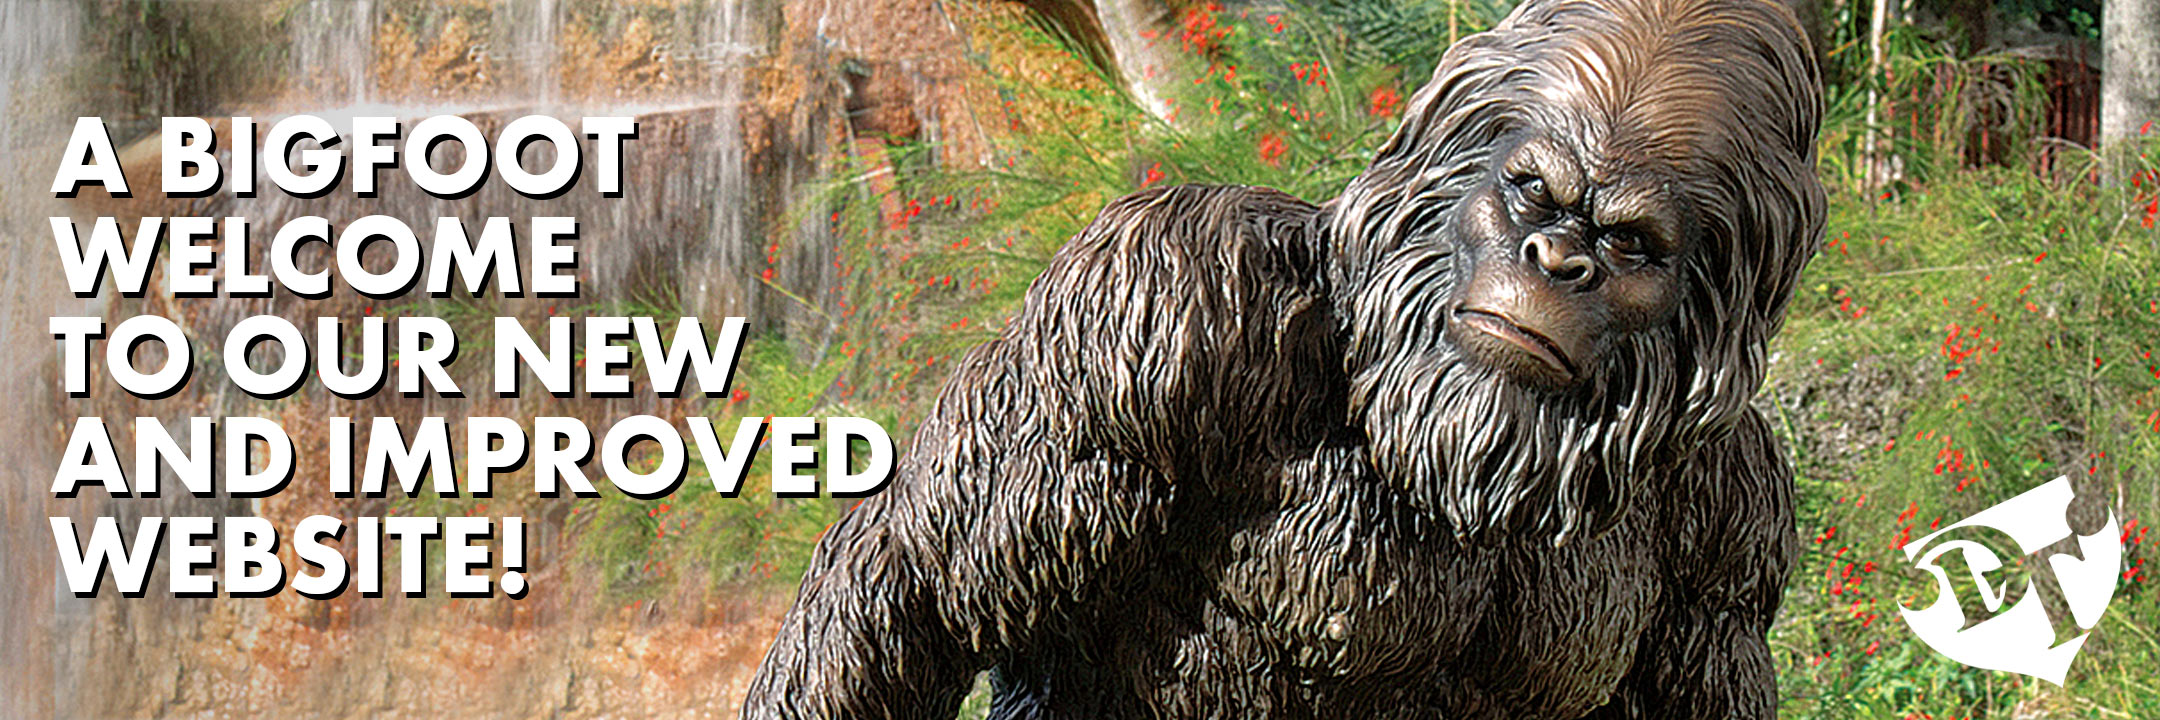 A Bigfoot Welcome to our new and improved website!